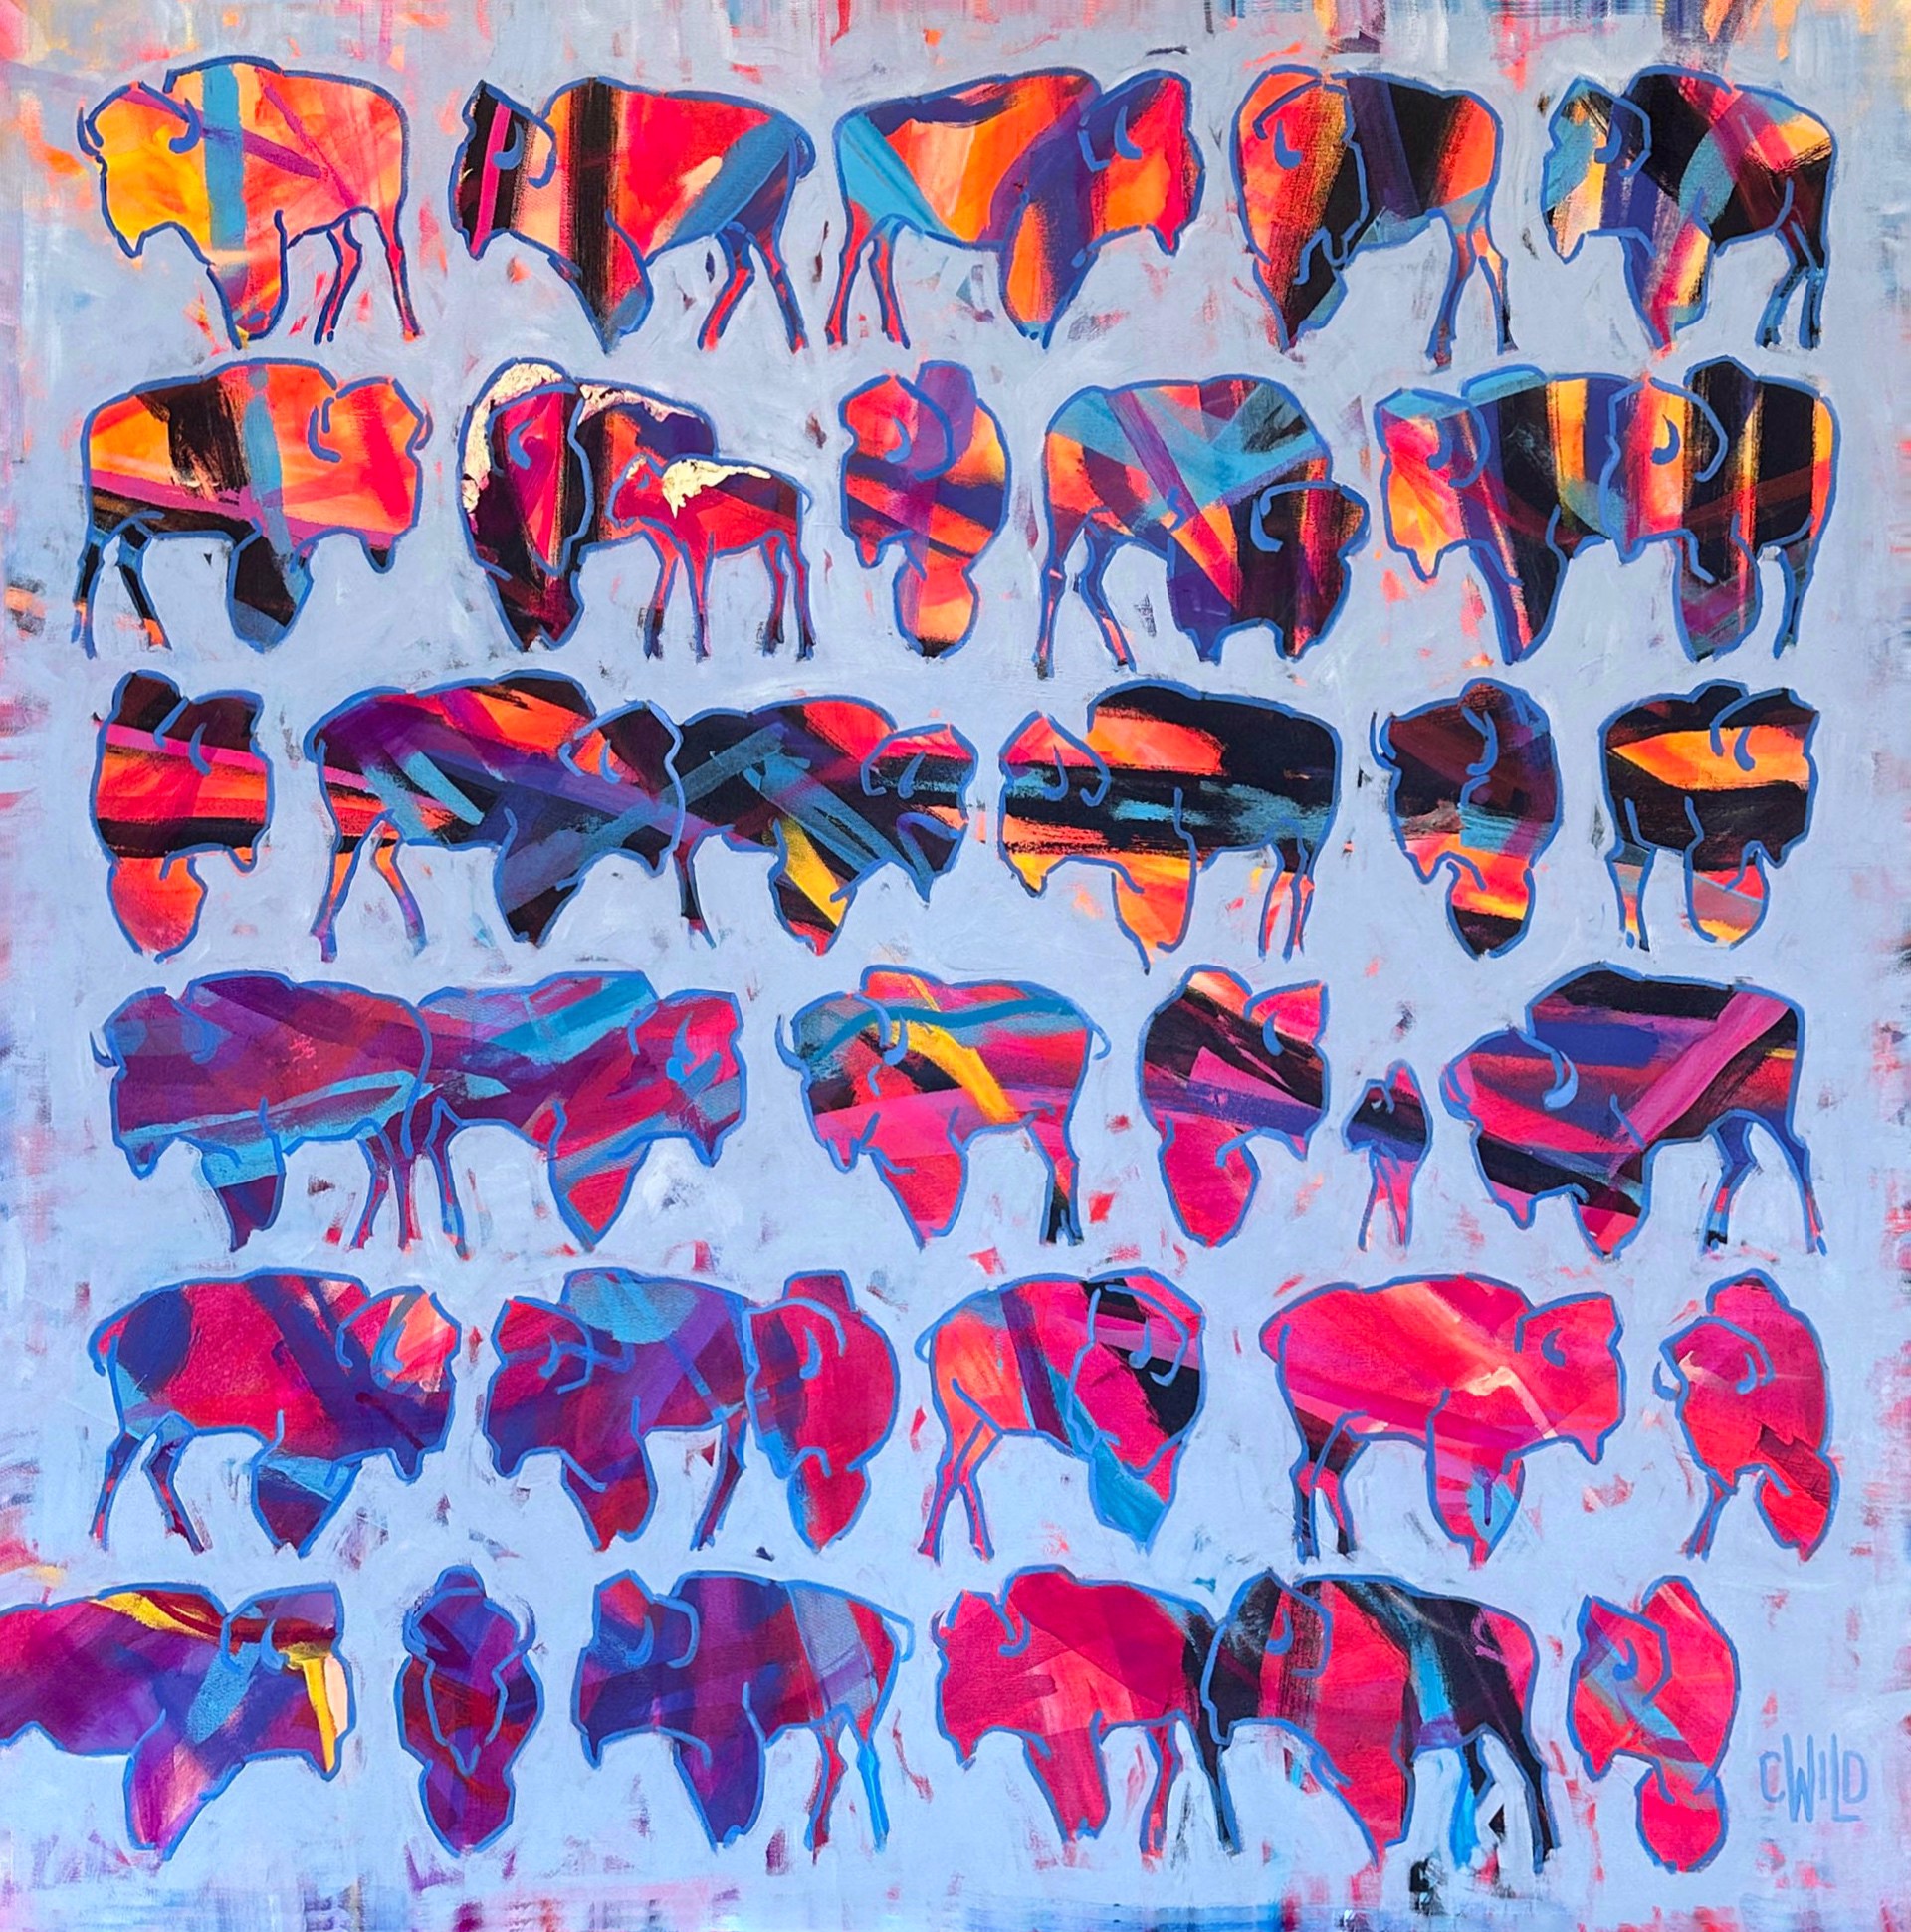 Original Acrylic Painting By Carrie Wild Featuring Colorful Bison In Sketched Outline On Abstract Light Blue Background